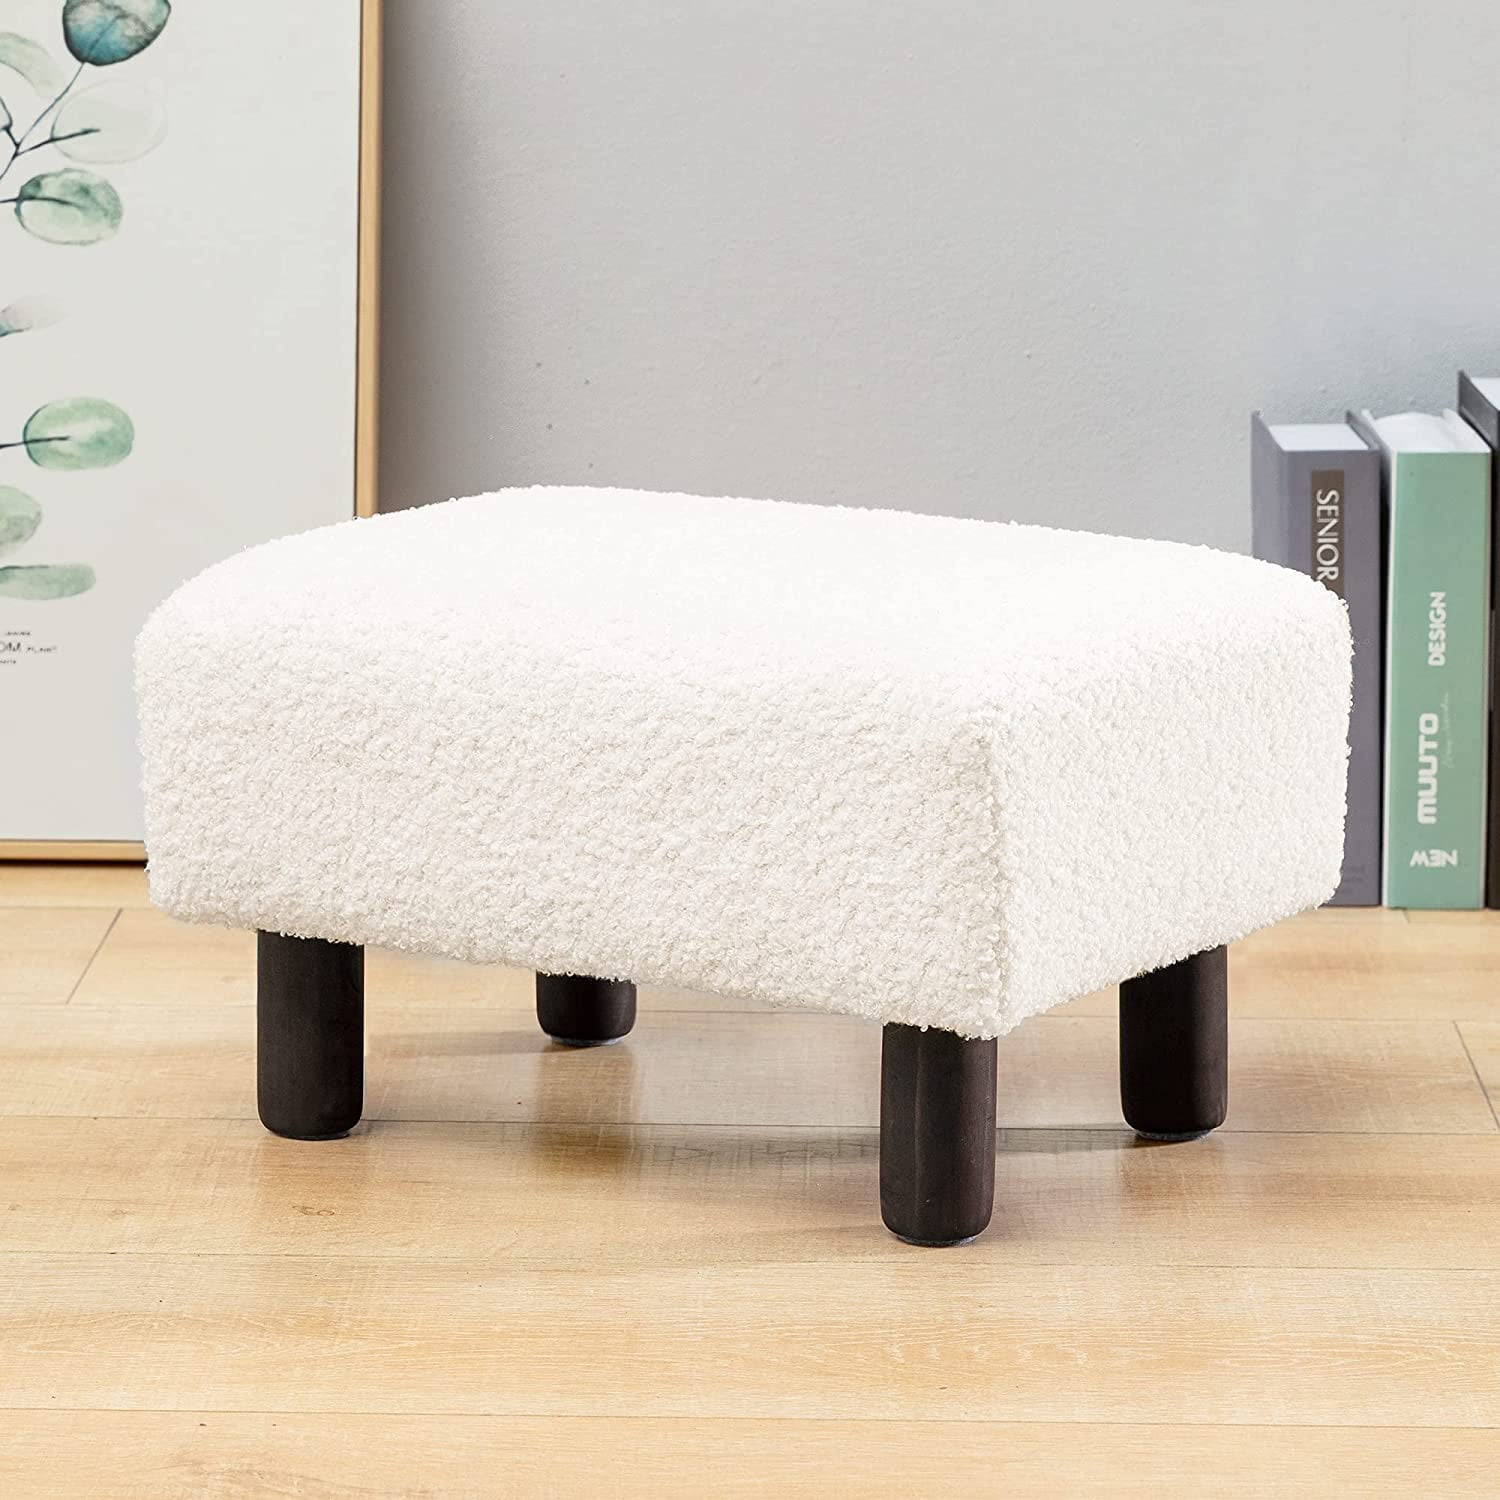 LUE BONA 13 inches Small Foot Stool PU Leather Ottoman with Plastic Legs Footrest Modern Living Room Bedroom Square Stool with Padded Seat Pet Steps Beige 